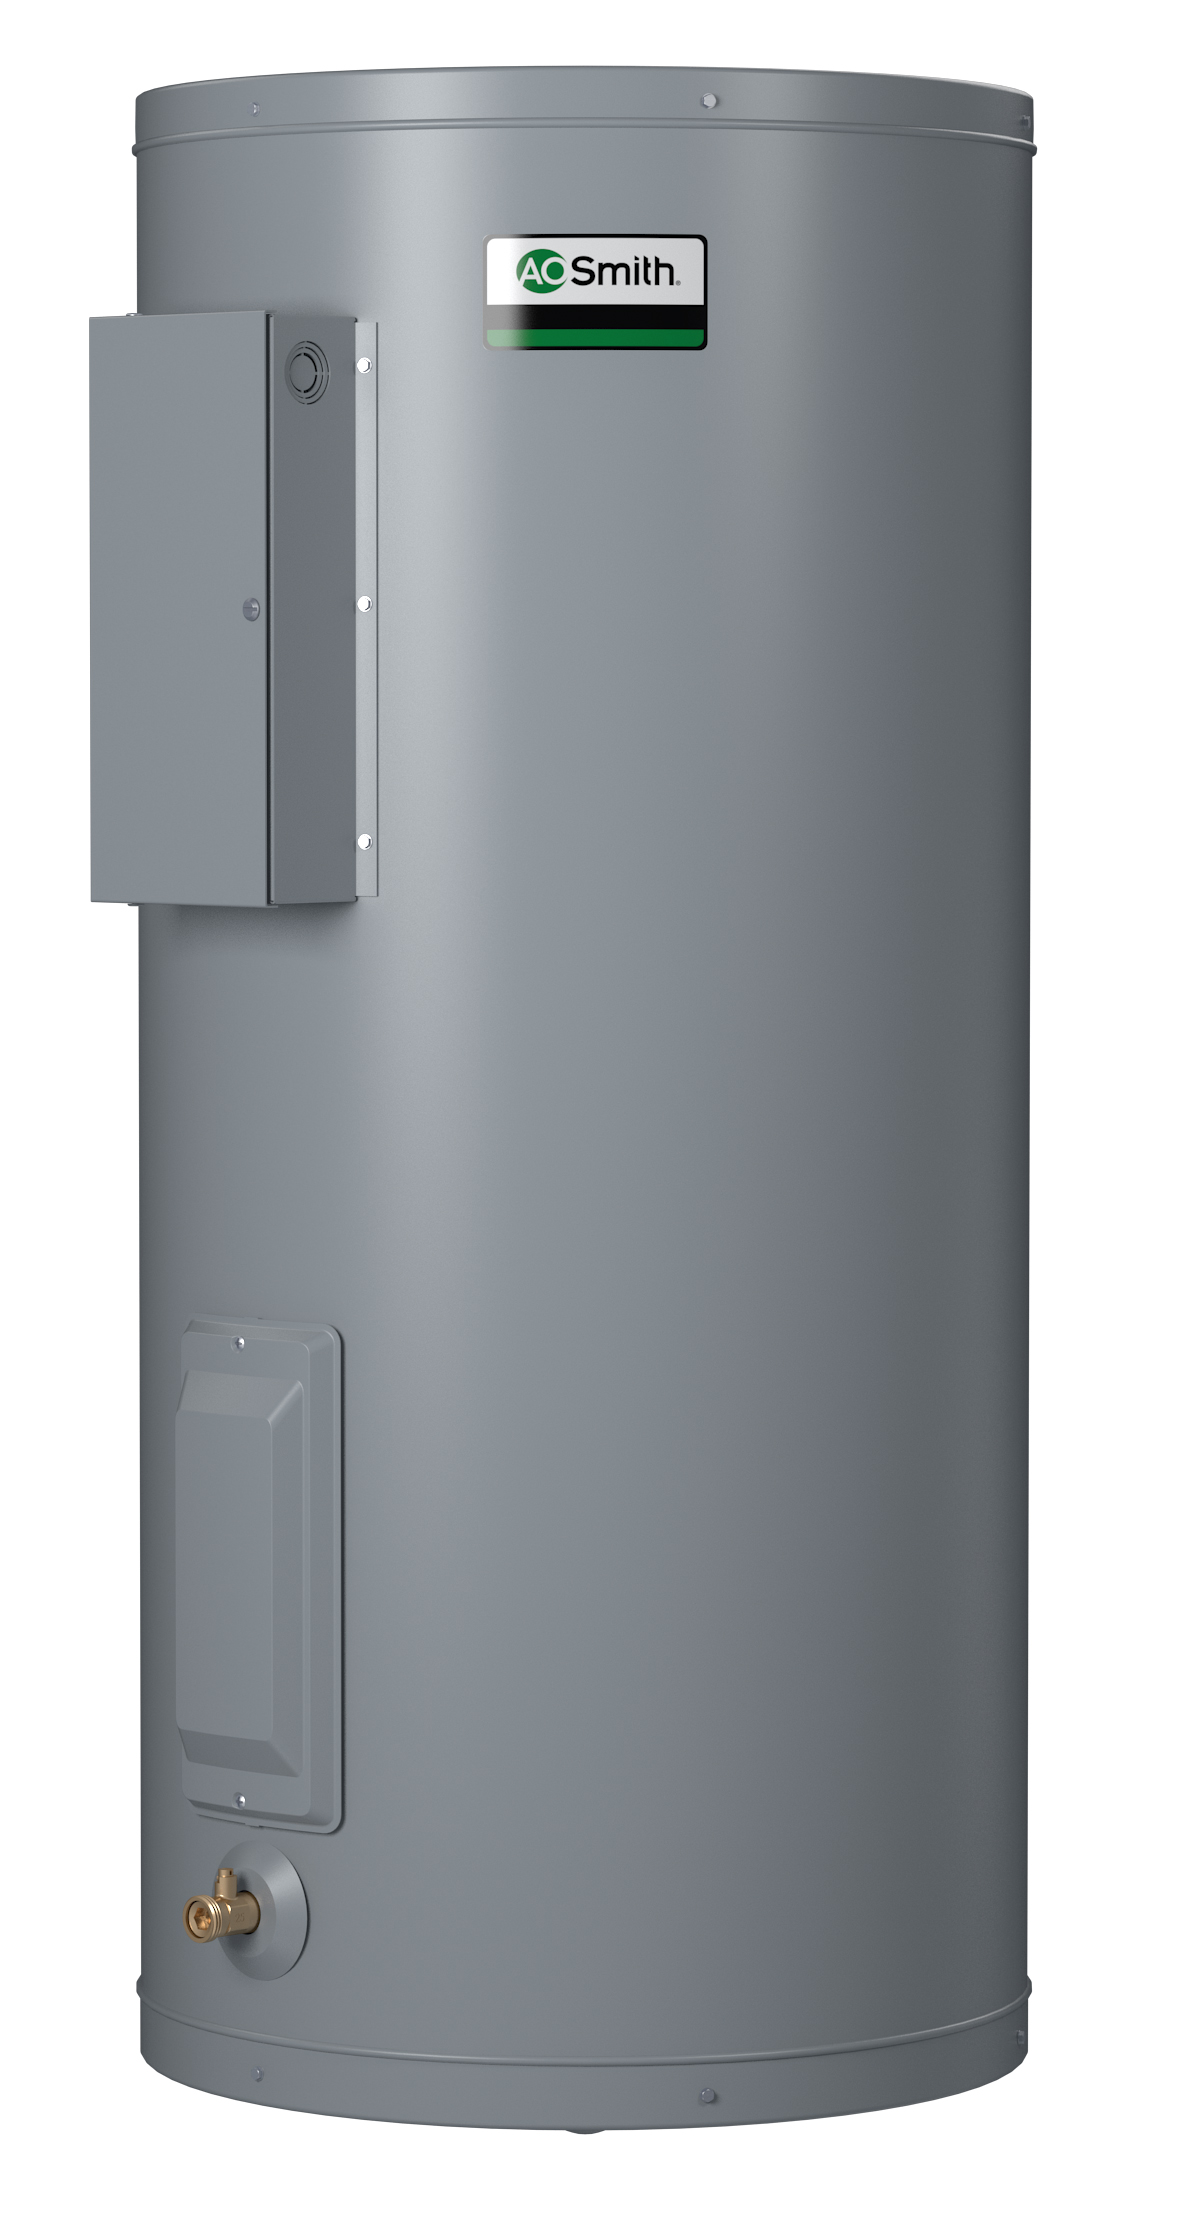 AO SMITH DEL-10S: 10 GALLONS, 4.0KW, 208 VOLT, 1 PHASE, SINGLE ELEMENT, LIGHT DUTY COMMERCIAL ELECTRIC WATER HEATER, DURA-POWER